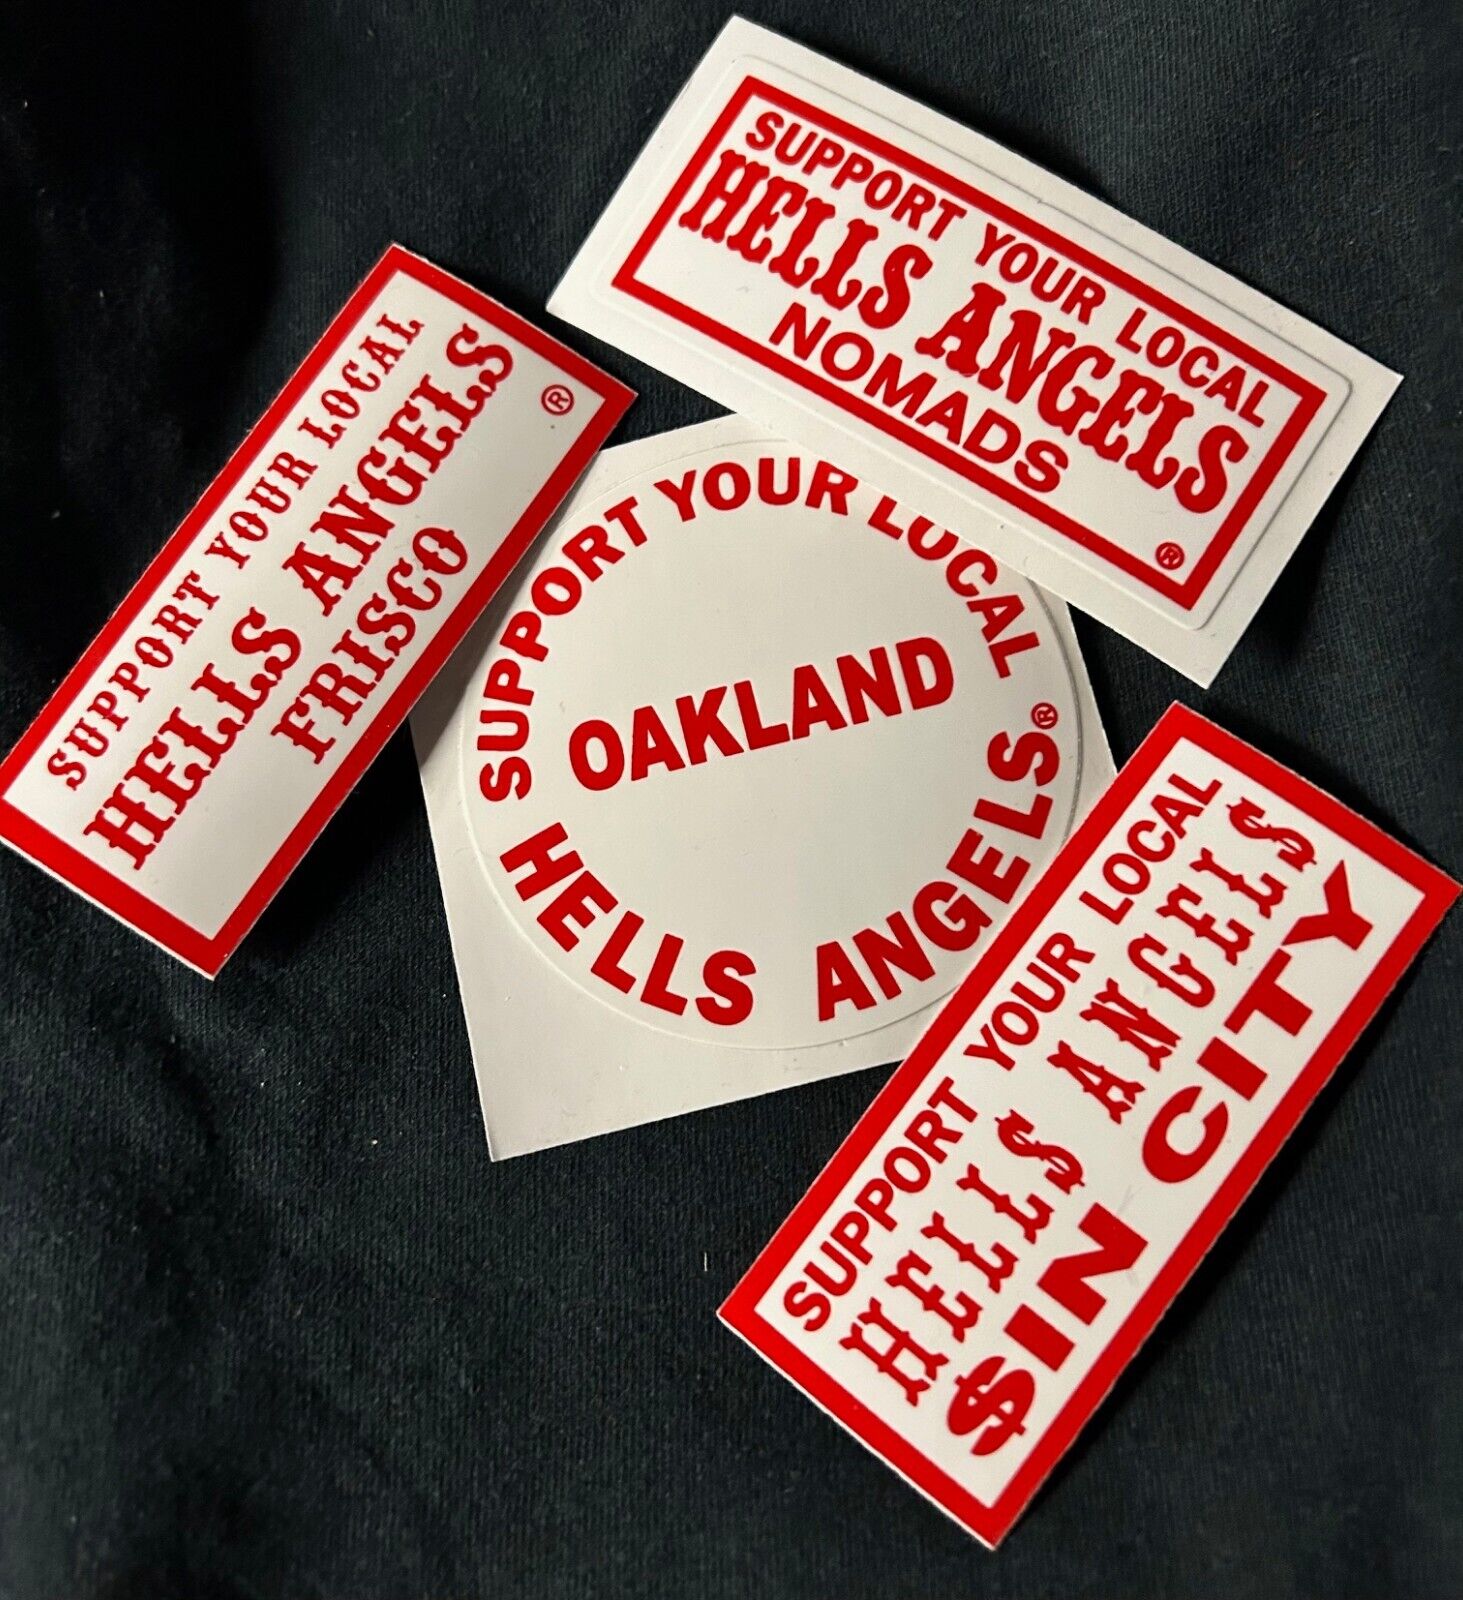 FLASH SALE       ENDS TONIGHT  12am PST      RARE HELLS ANGELS SUPPORT STICKERS 